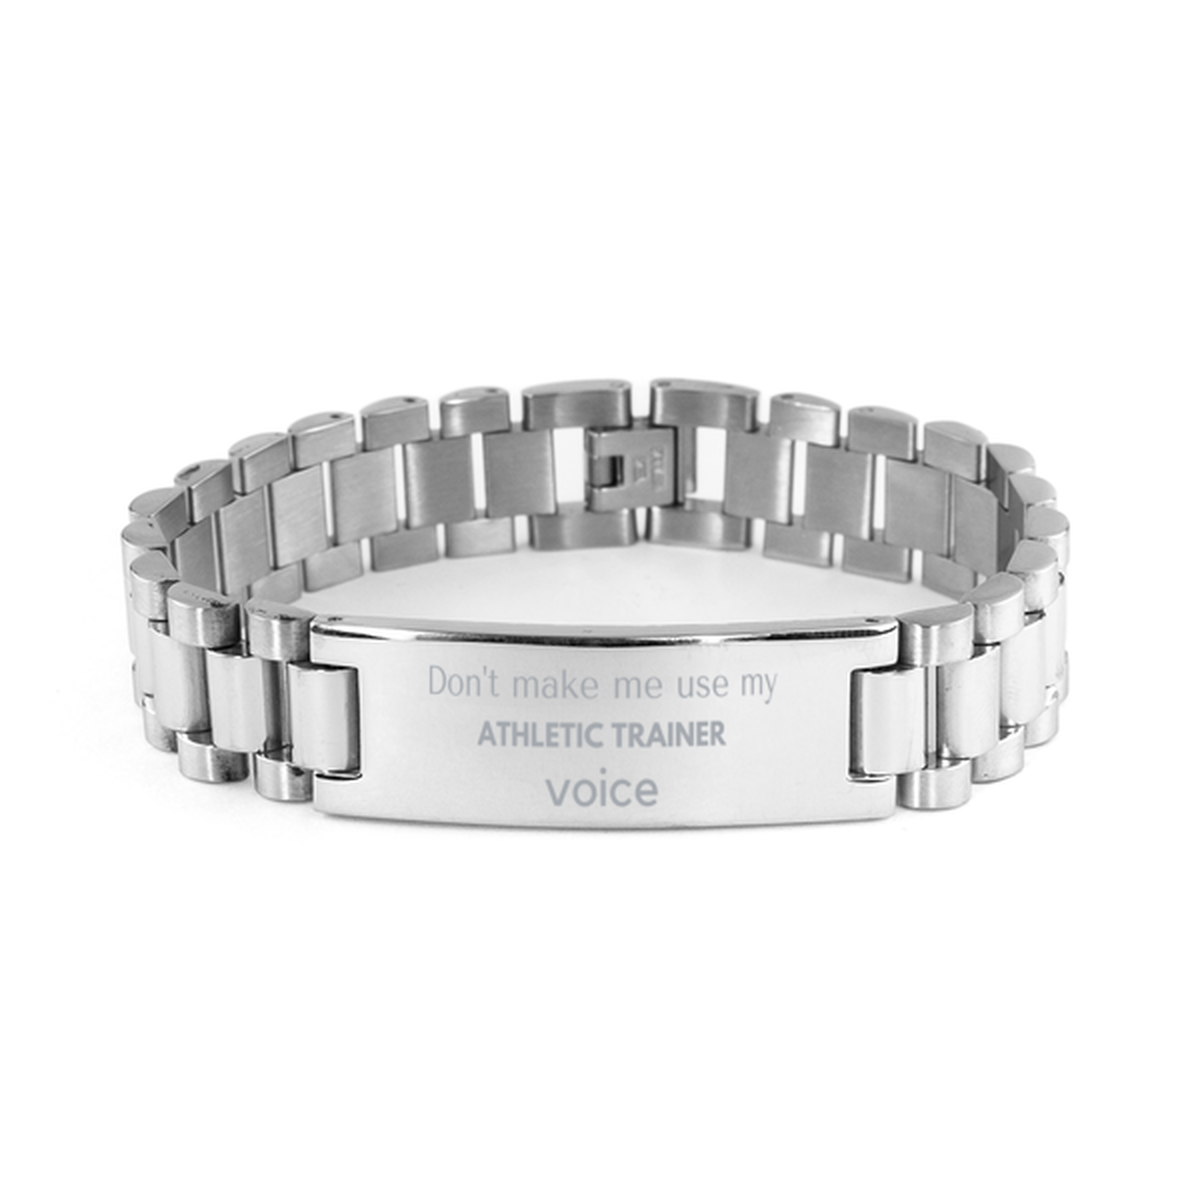 Don't make me use my Athletic Trainer voice, Sarcasm Athletic Trainer Gifts, Christmas Athletic Trainer Ladder Stainless Steel Bracelet Birthday Unique Gifts For Athletic Trainer Coworkers, Men, Women, Colleague, Friends